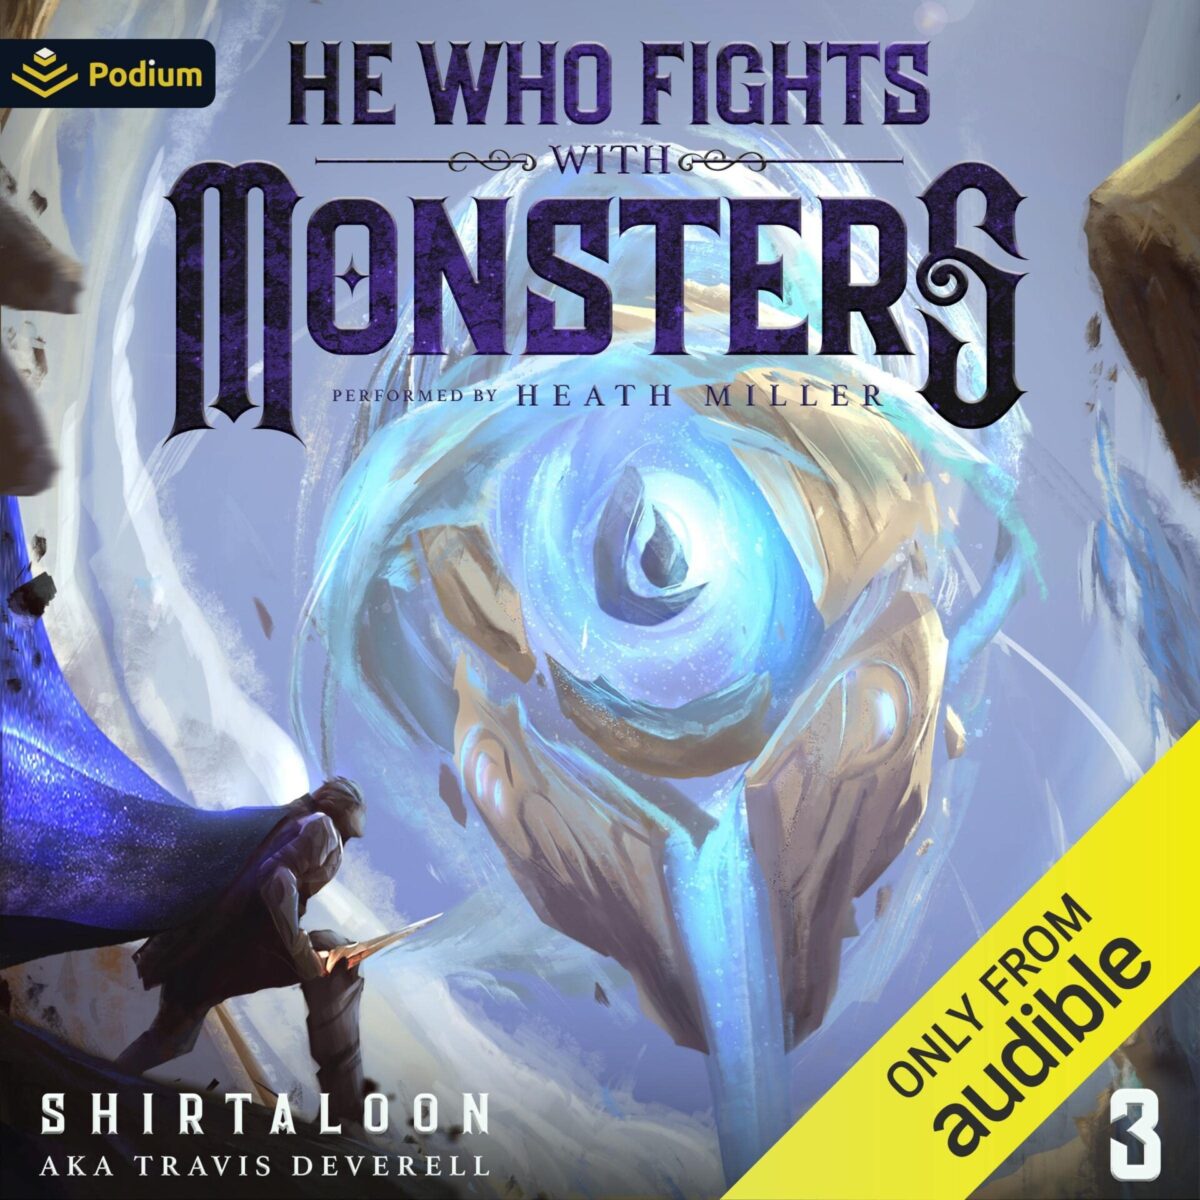 He Who Fights with Monsters 3 – The Audiobook Review